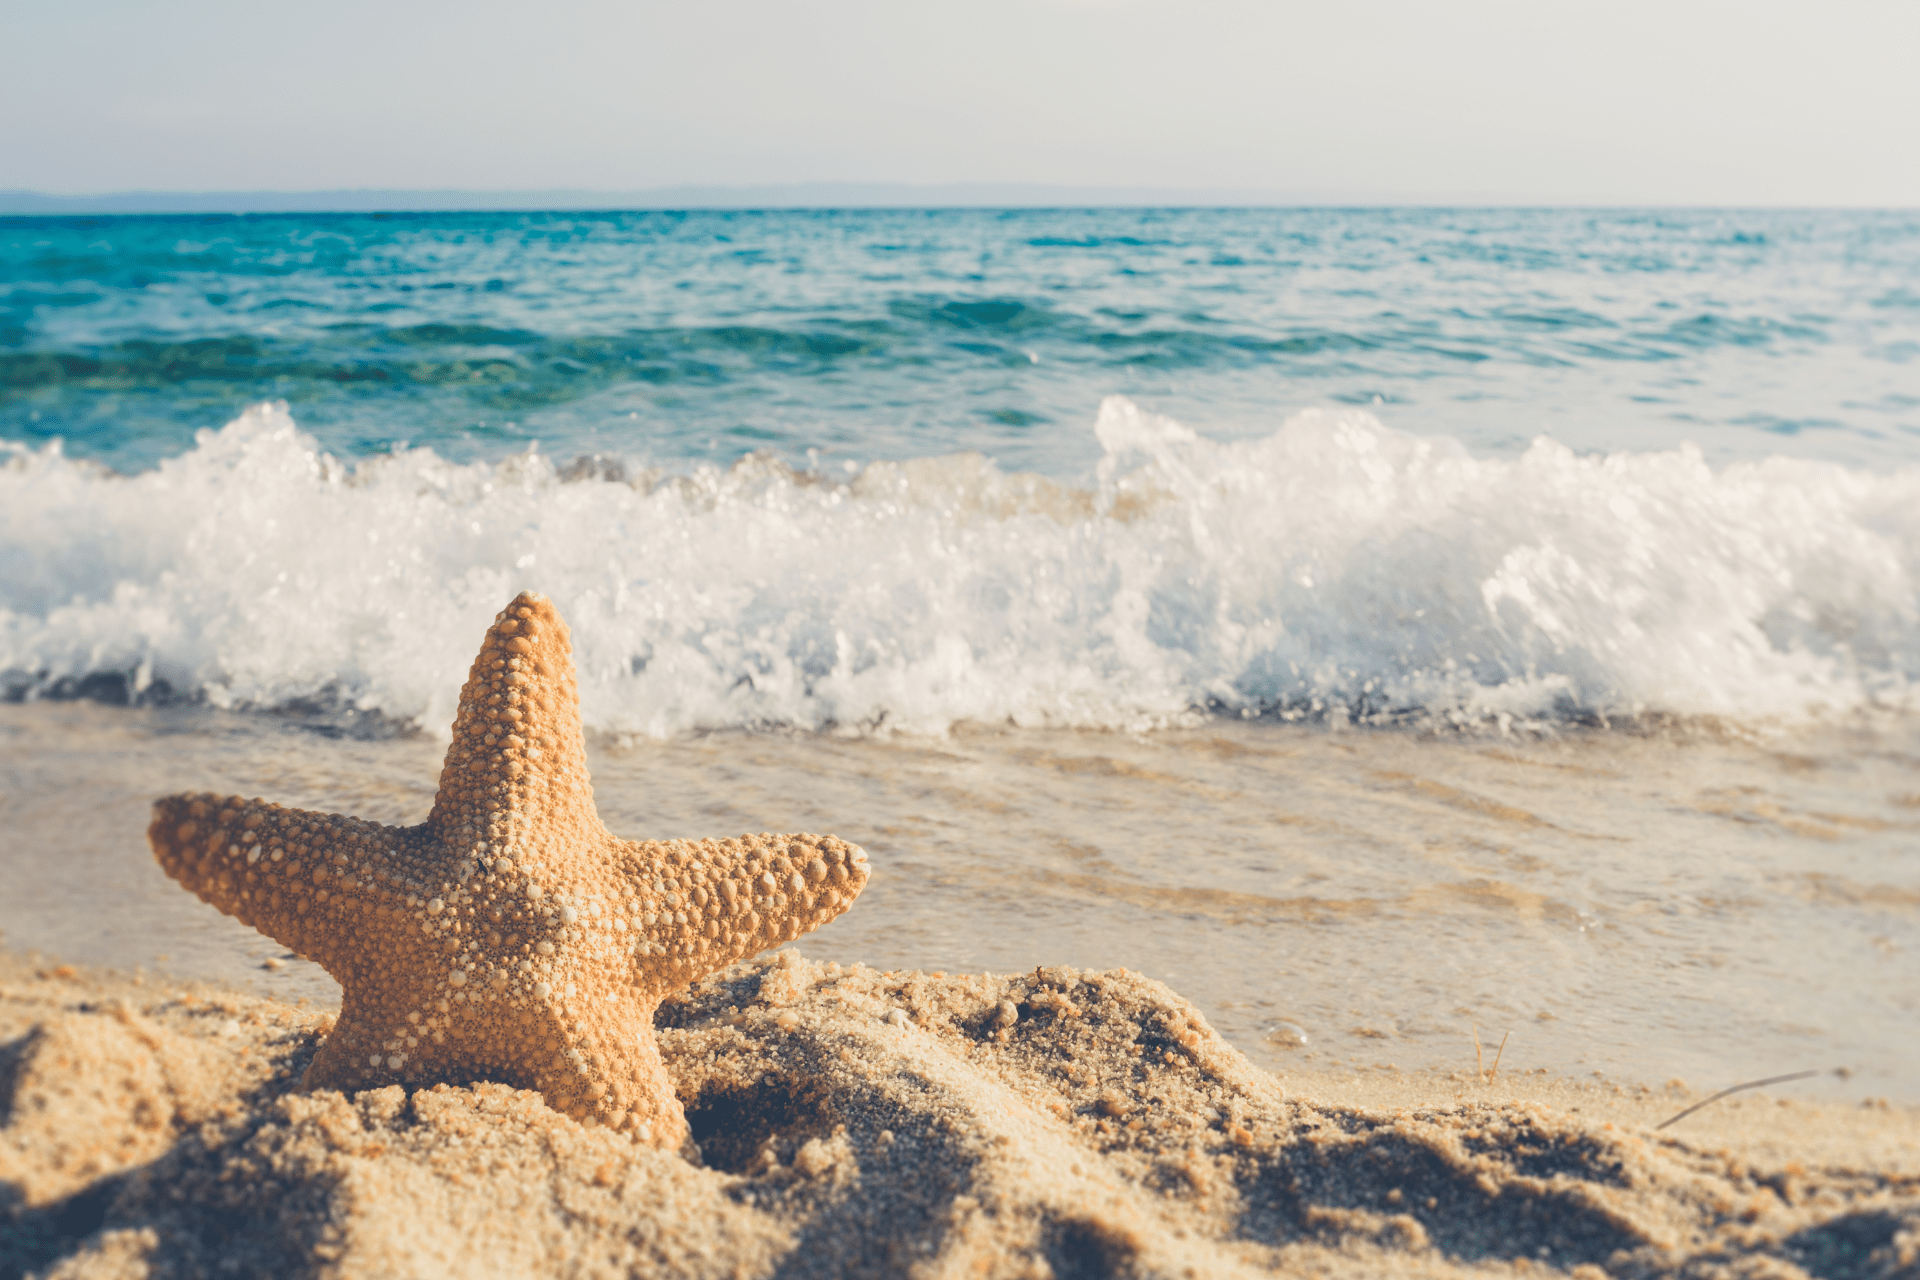 A Starfish in front of a sandy beach and waves